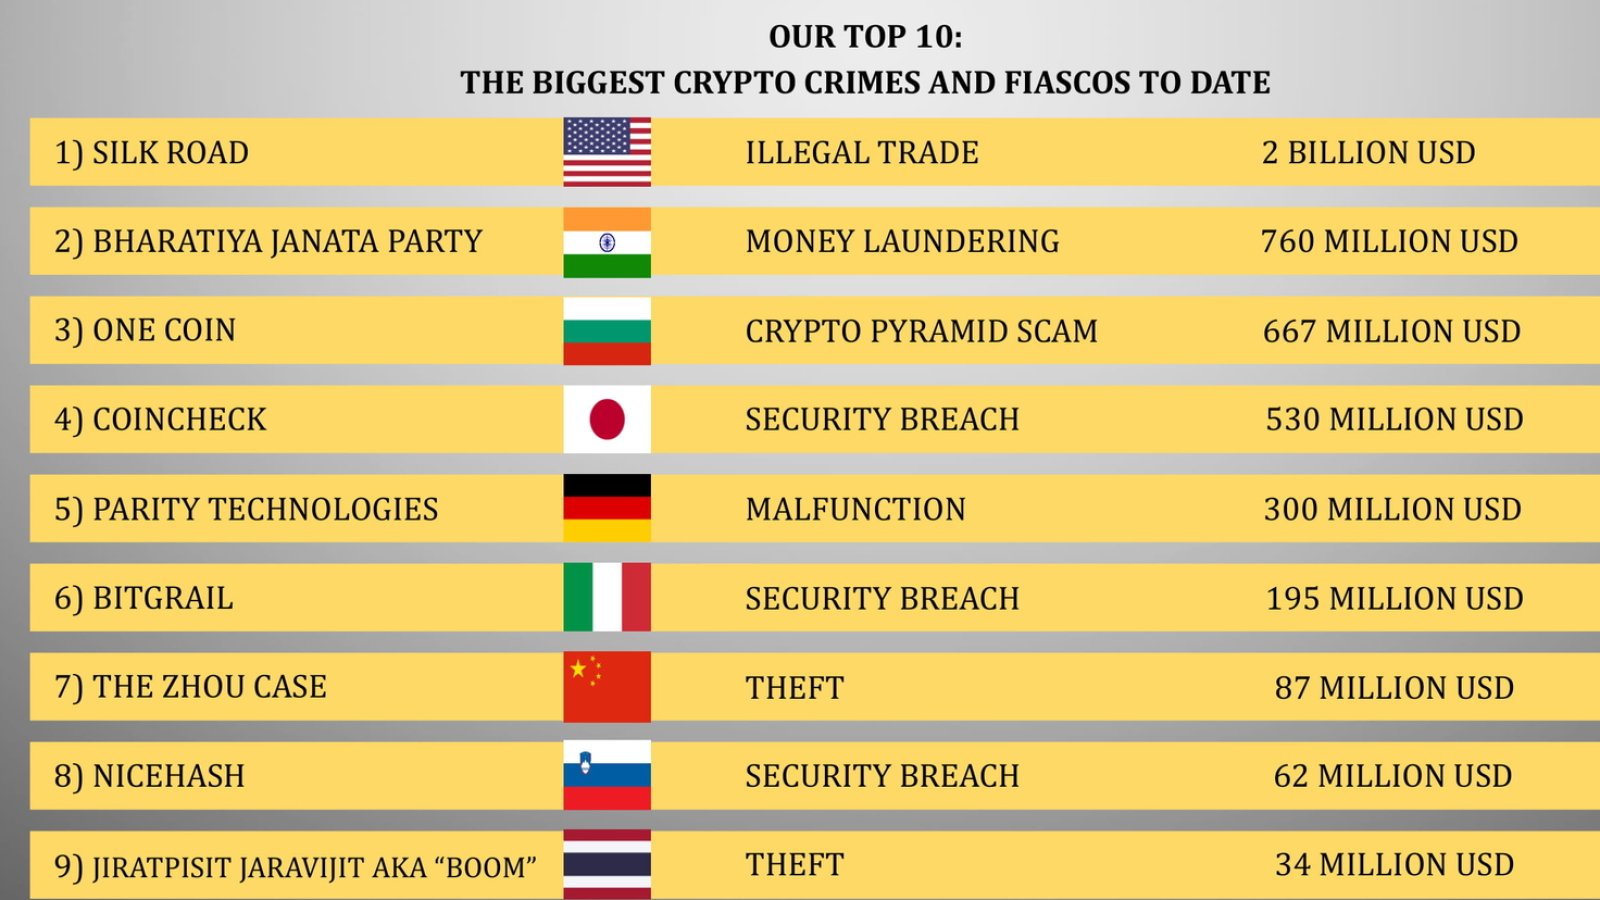 The Biggest Crypto Crimes and Fiascos to Date: Our Top 10 List